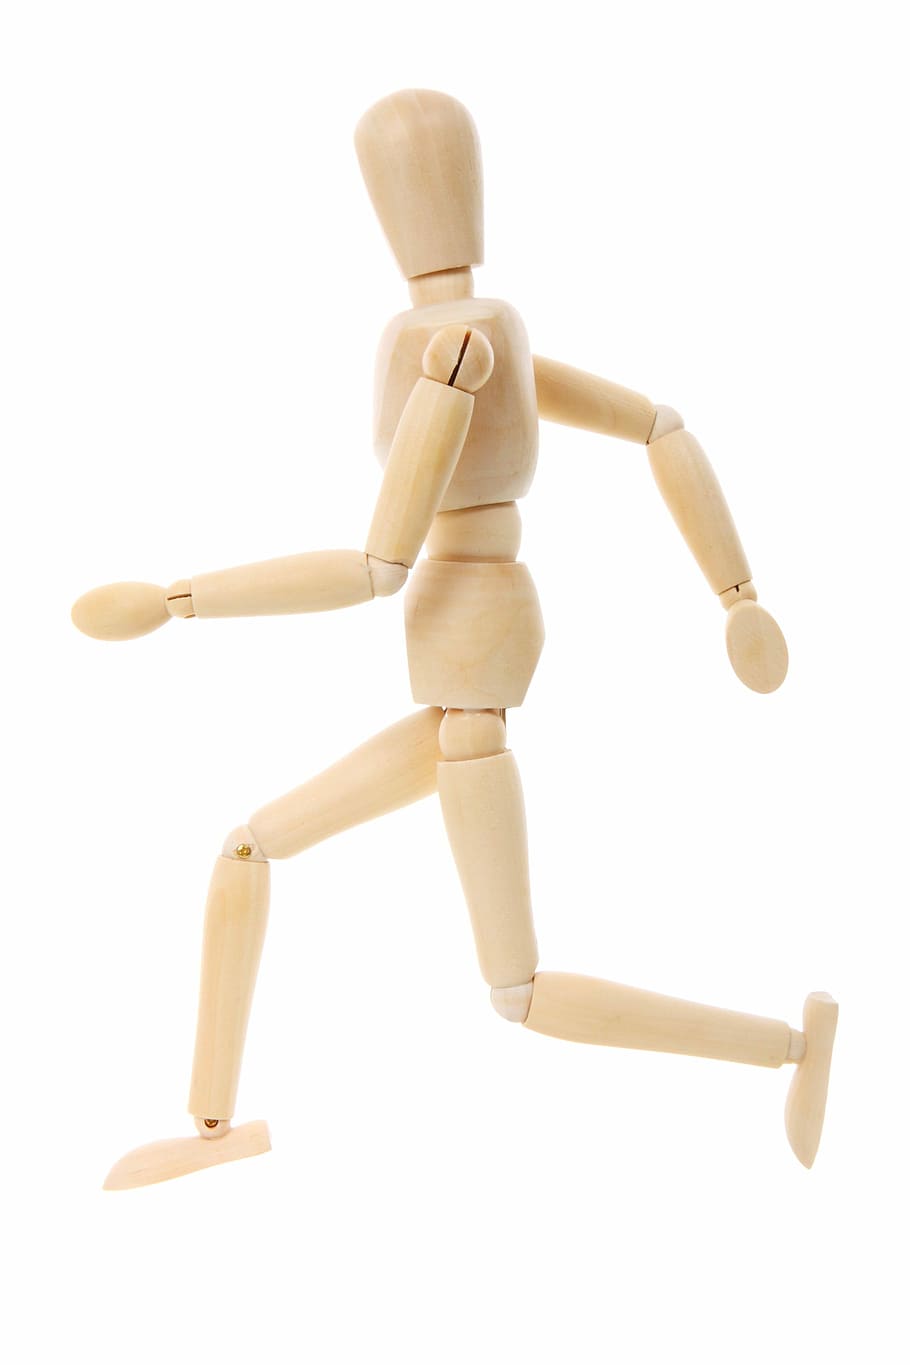 brown, wooden, joint, action figurine, action, figurine, exercise, fit, fitness, health